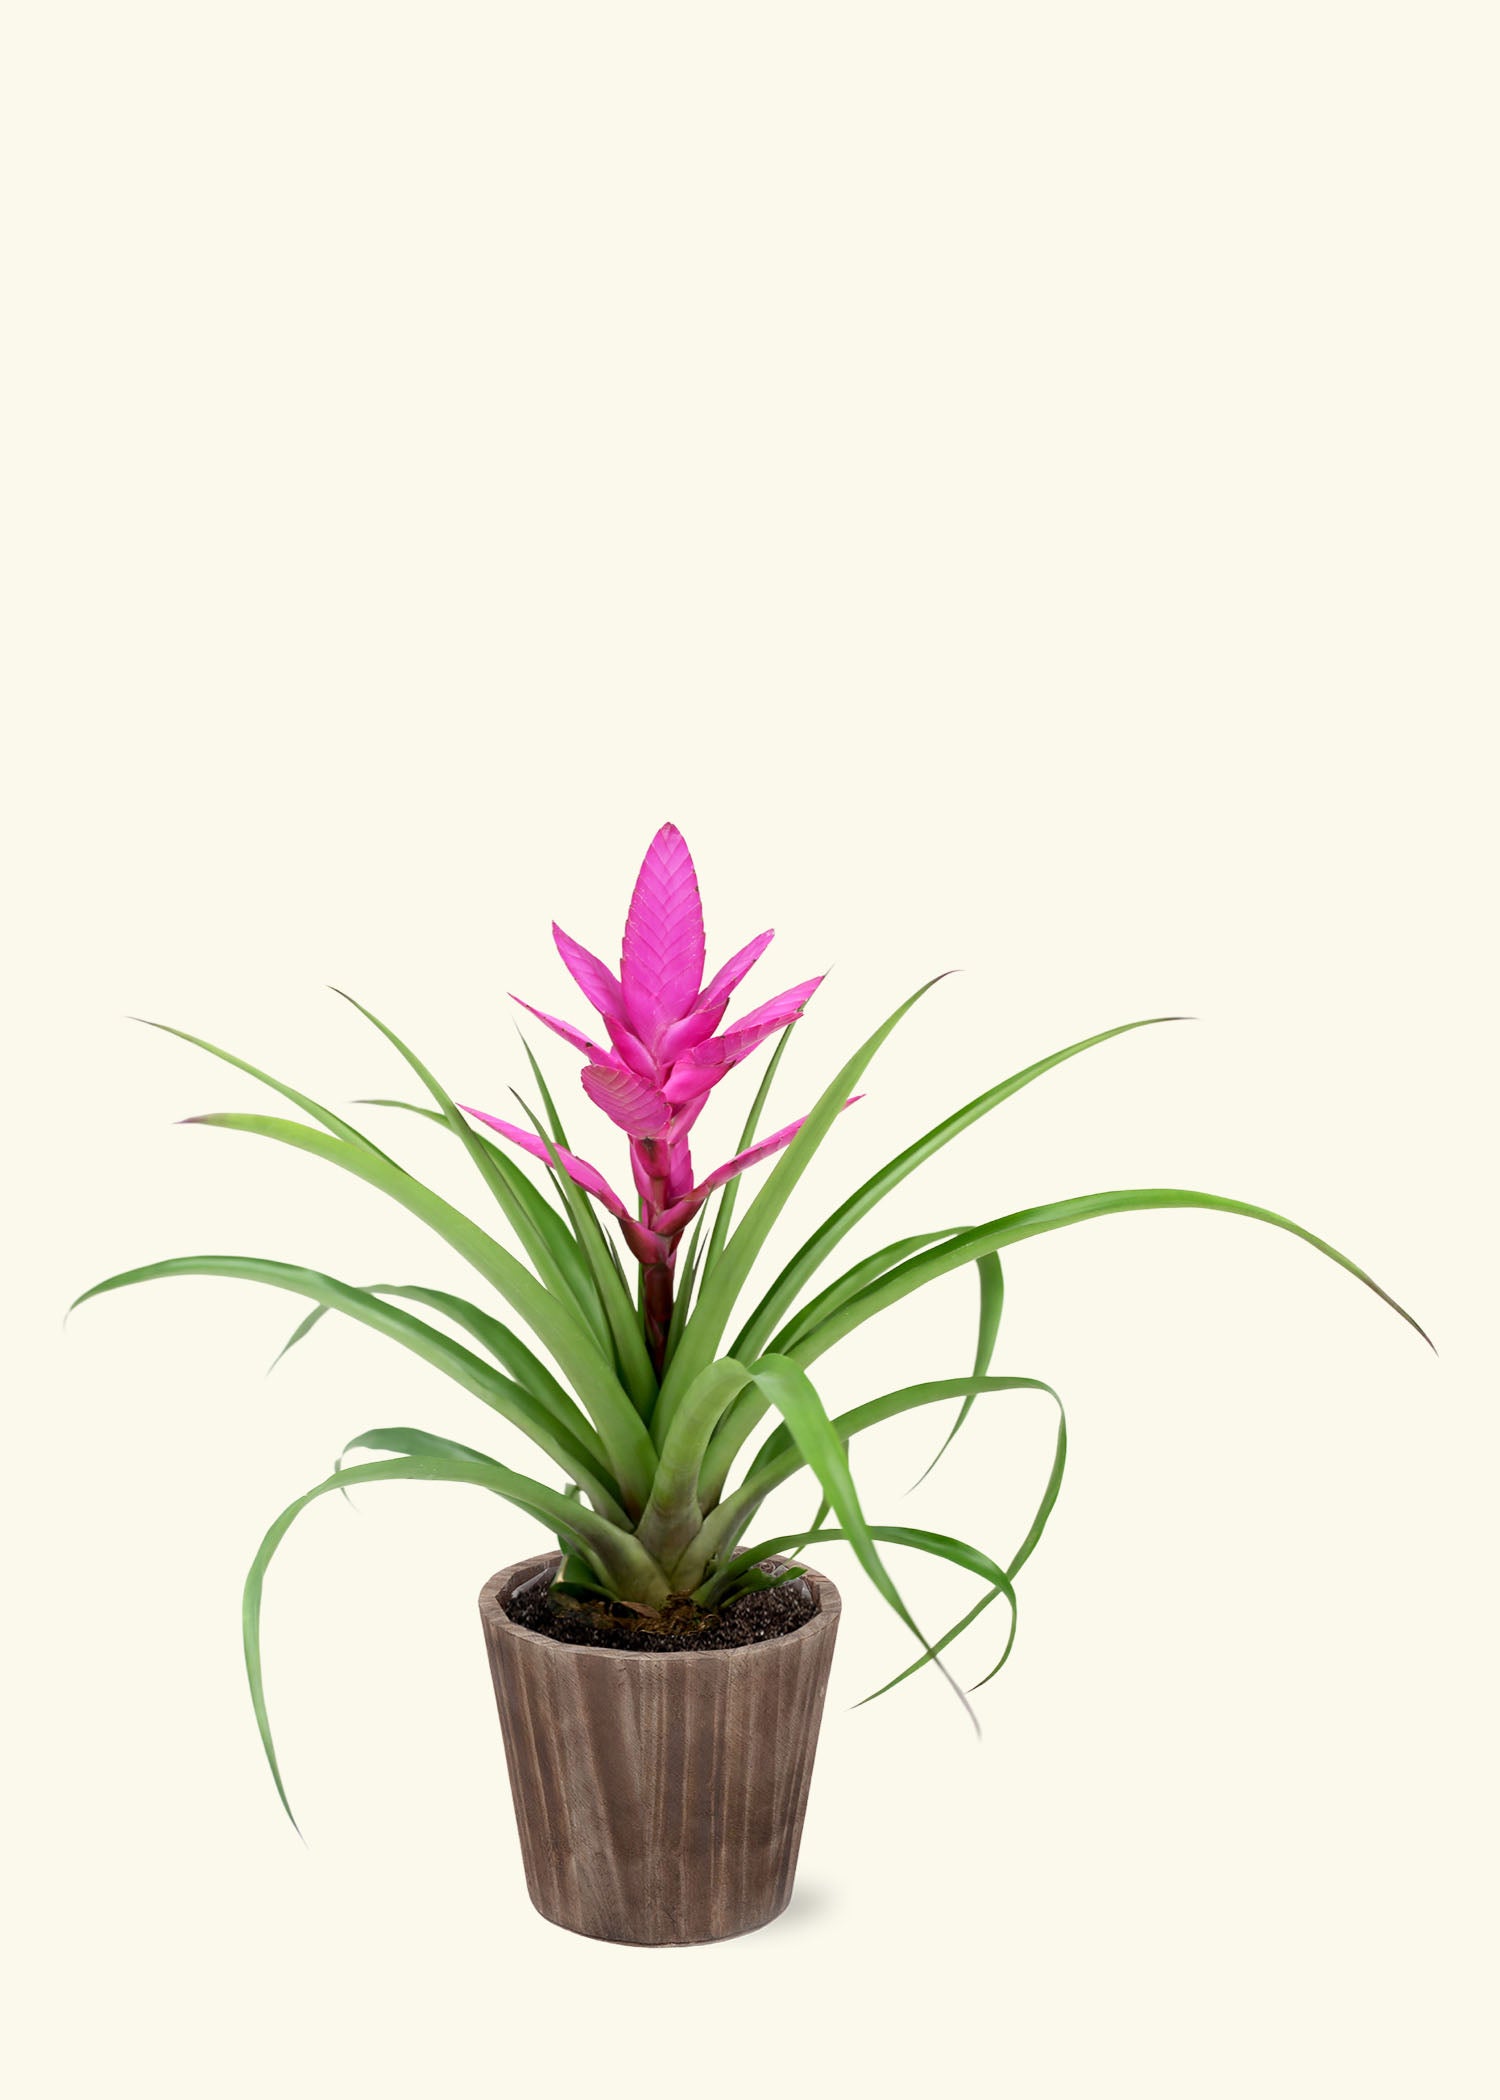 Small Pink Bromeliad in a brown wilson wood grow pot.